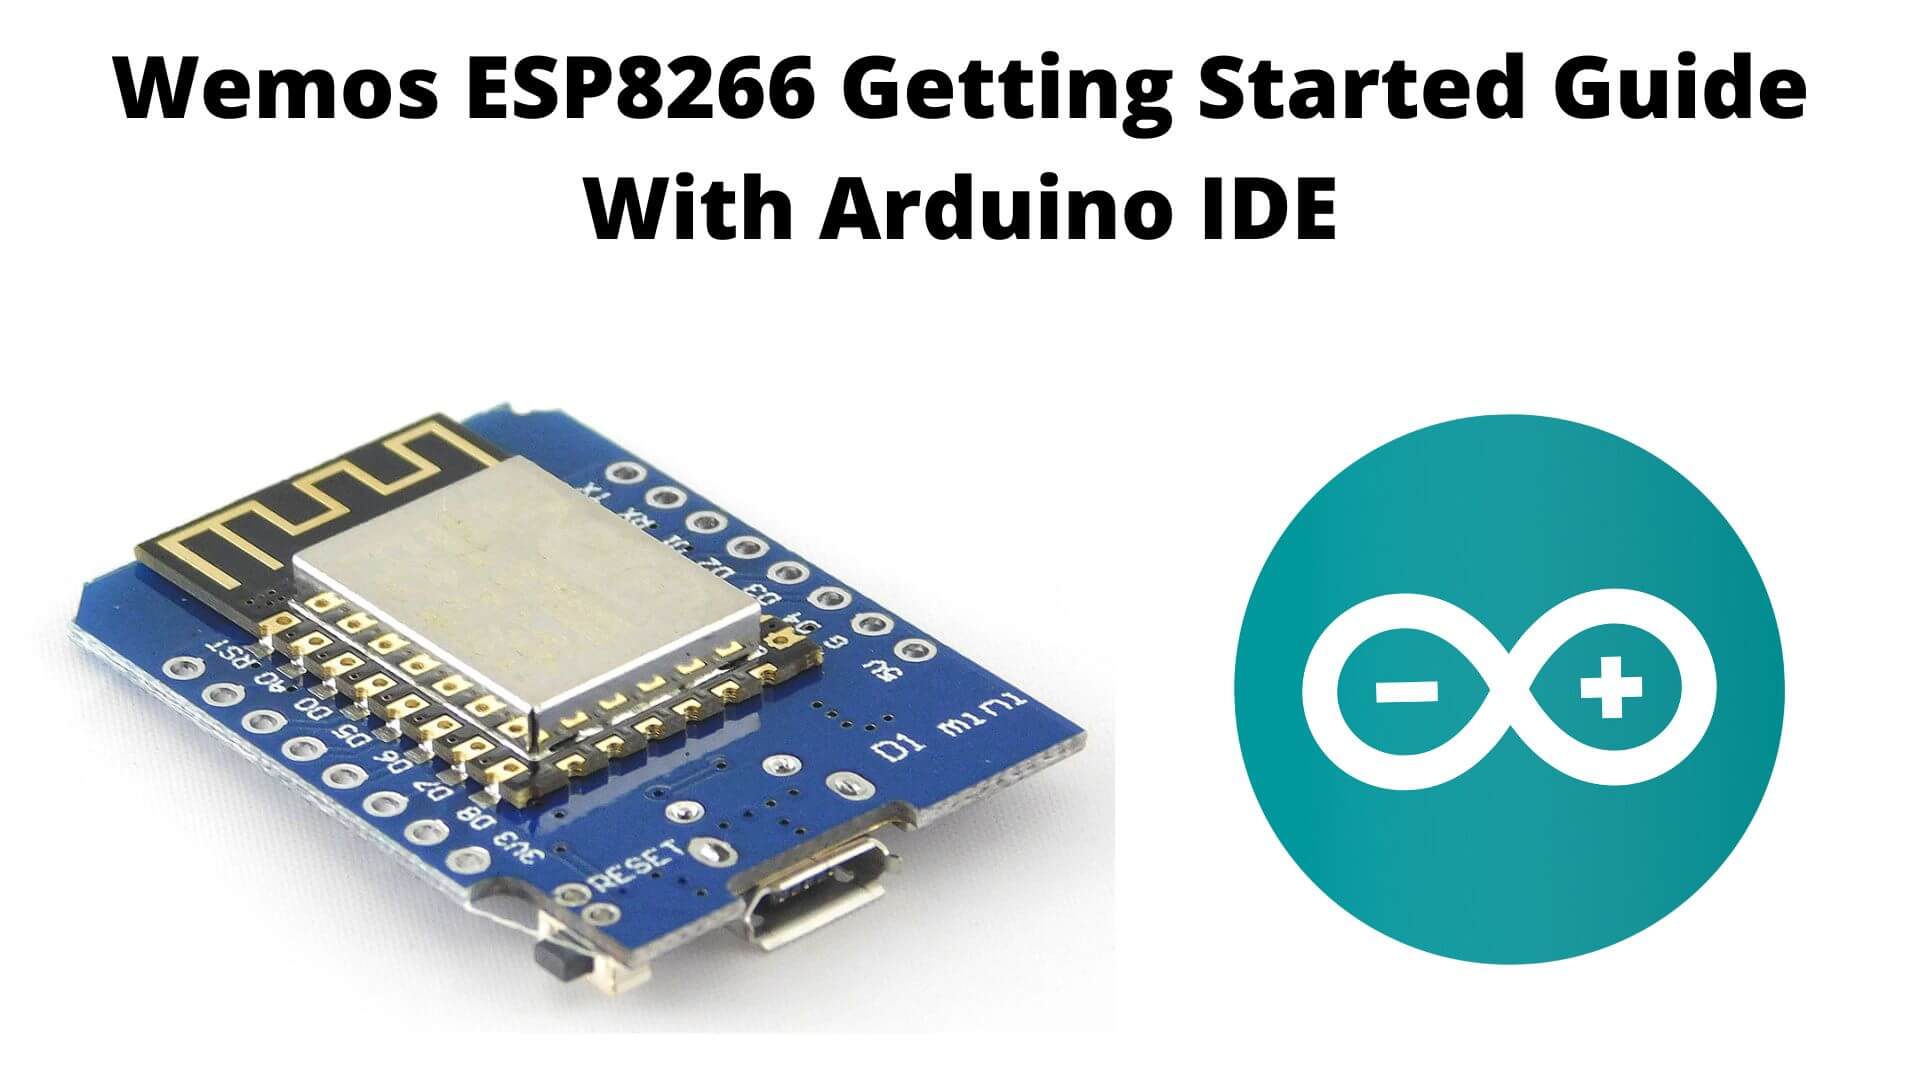 https://diyprojectslab.com/wp-content/uploads/2022/06/Wemos-ESP8266-Getting-Started-Guide-With-Arduino-IDE.jpg